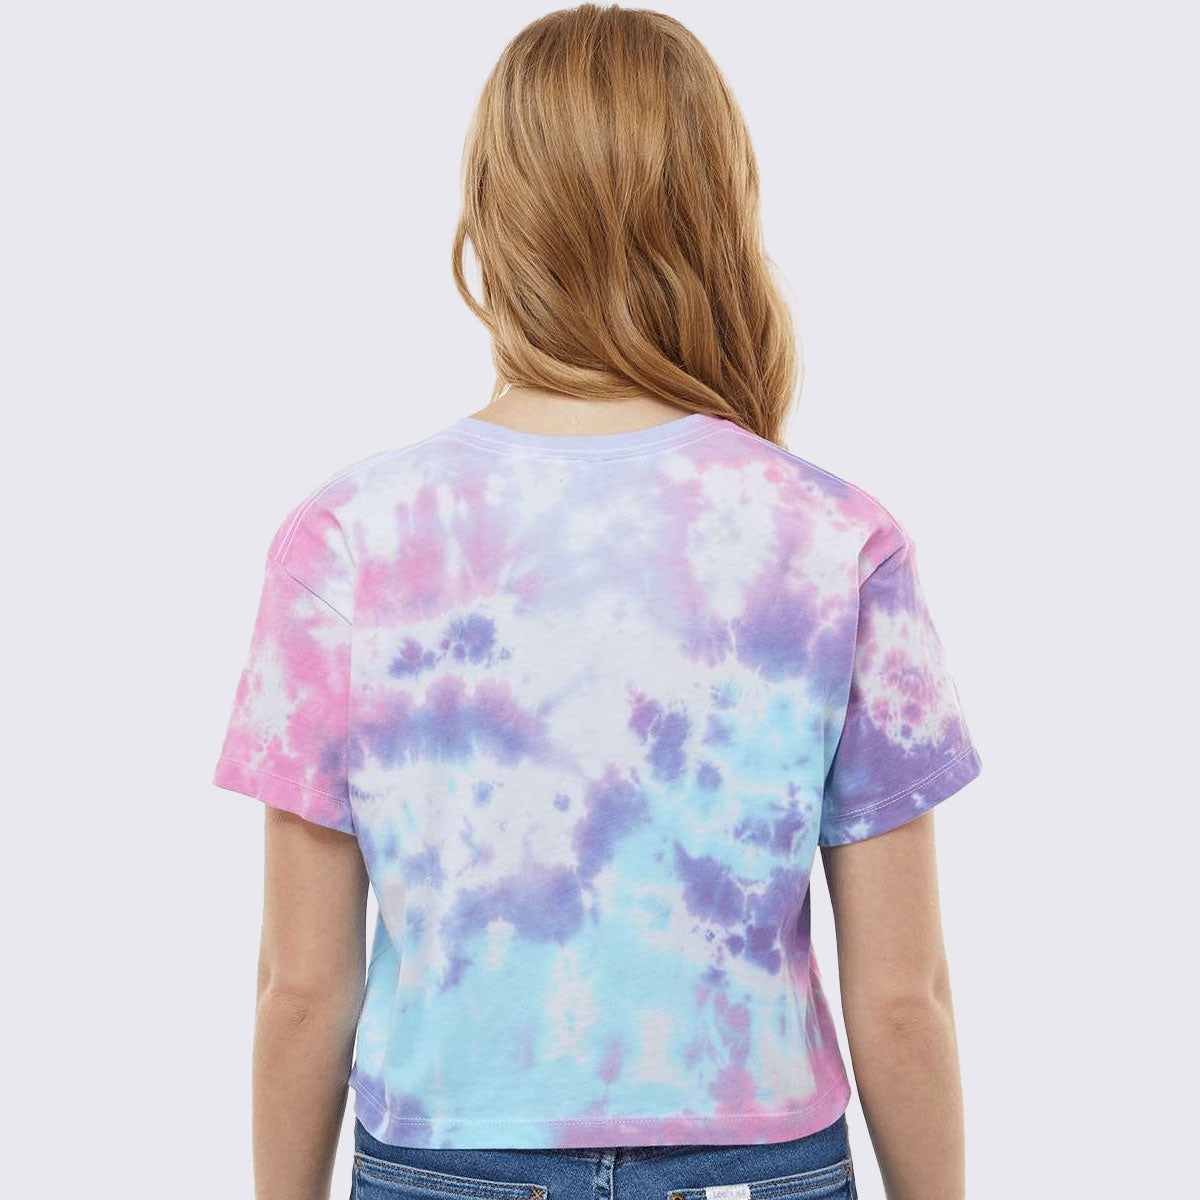 Am I Jacked Yet Women's Tie-Dyed Crop T-Shirt - The LFT Clothing